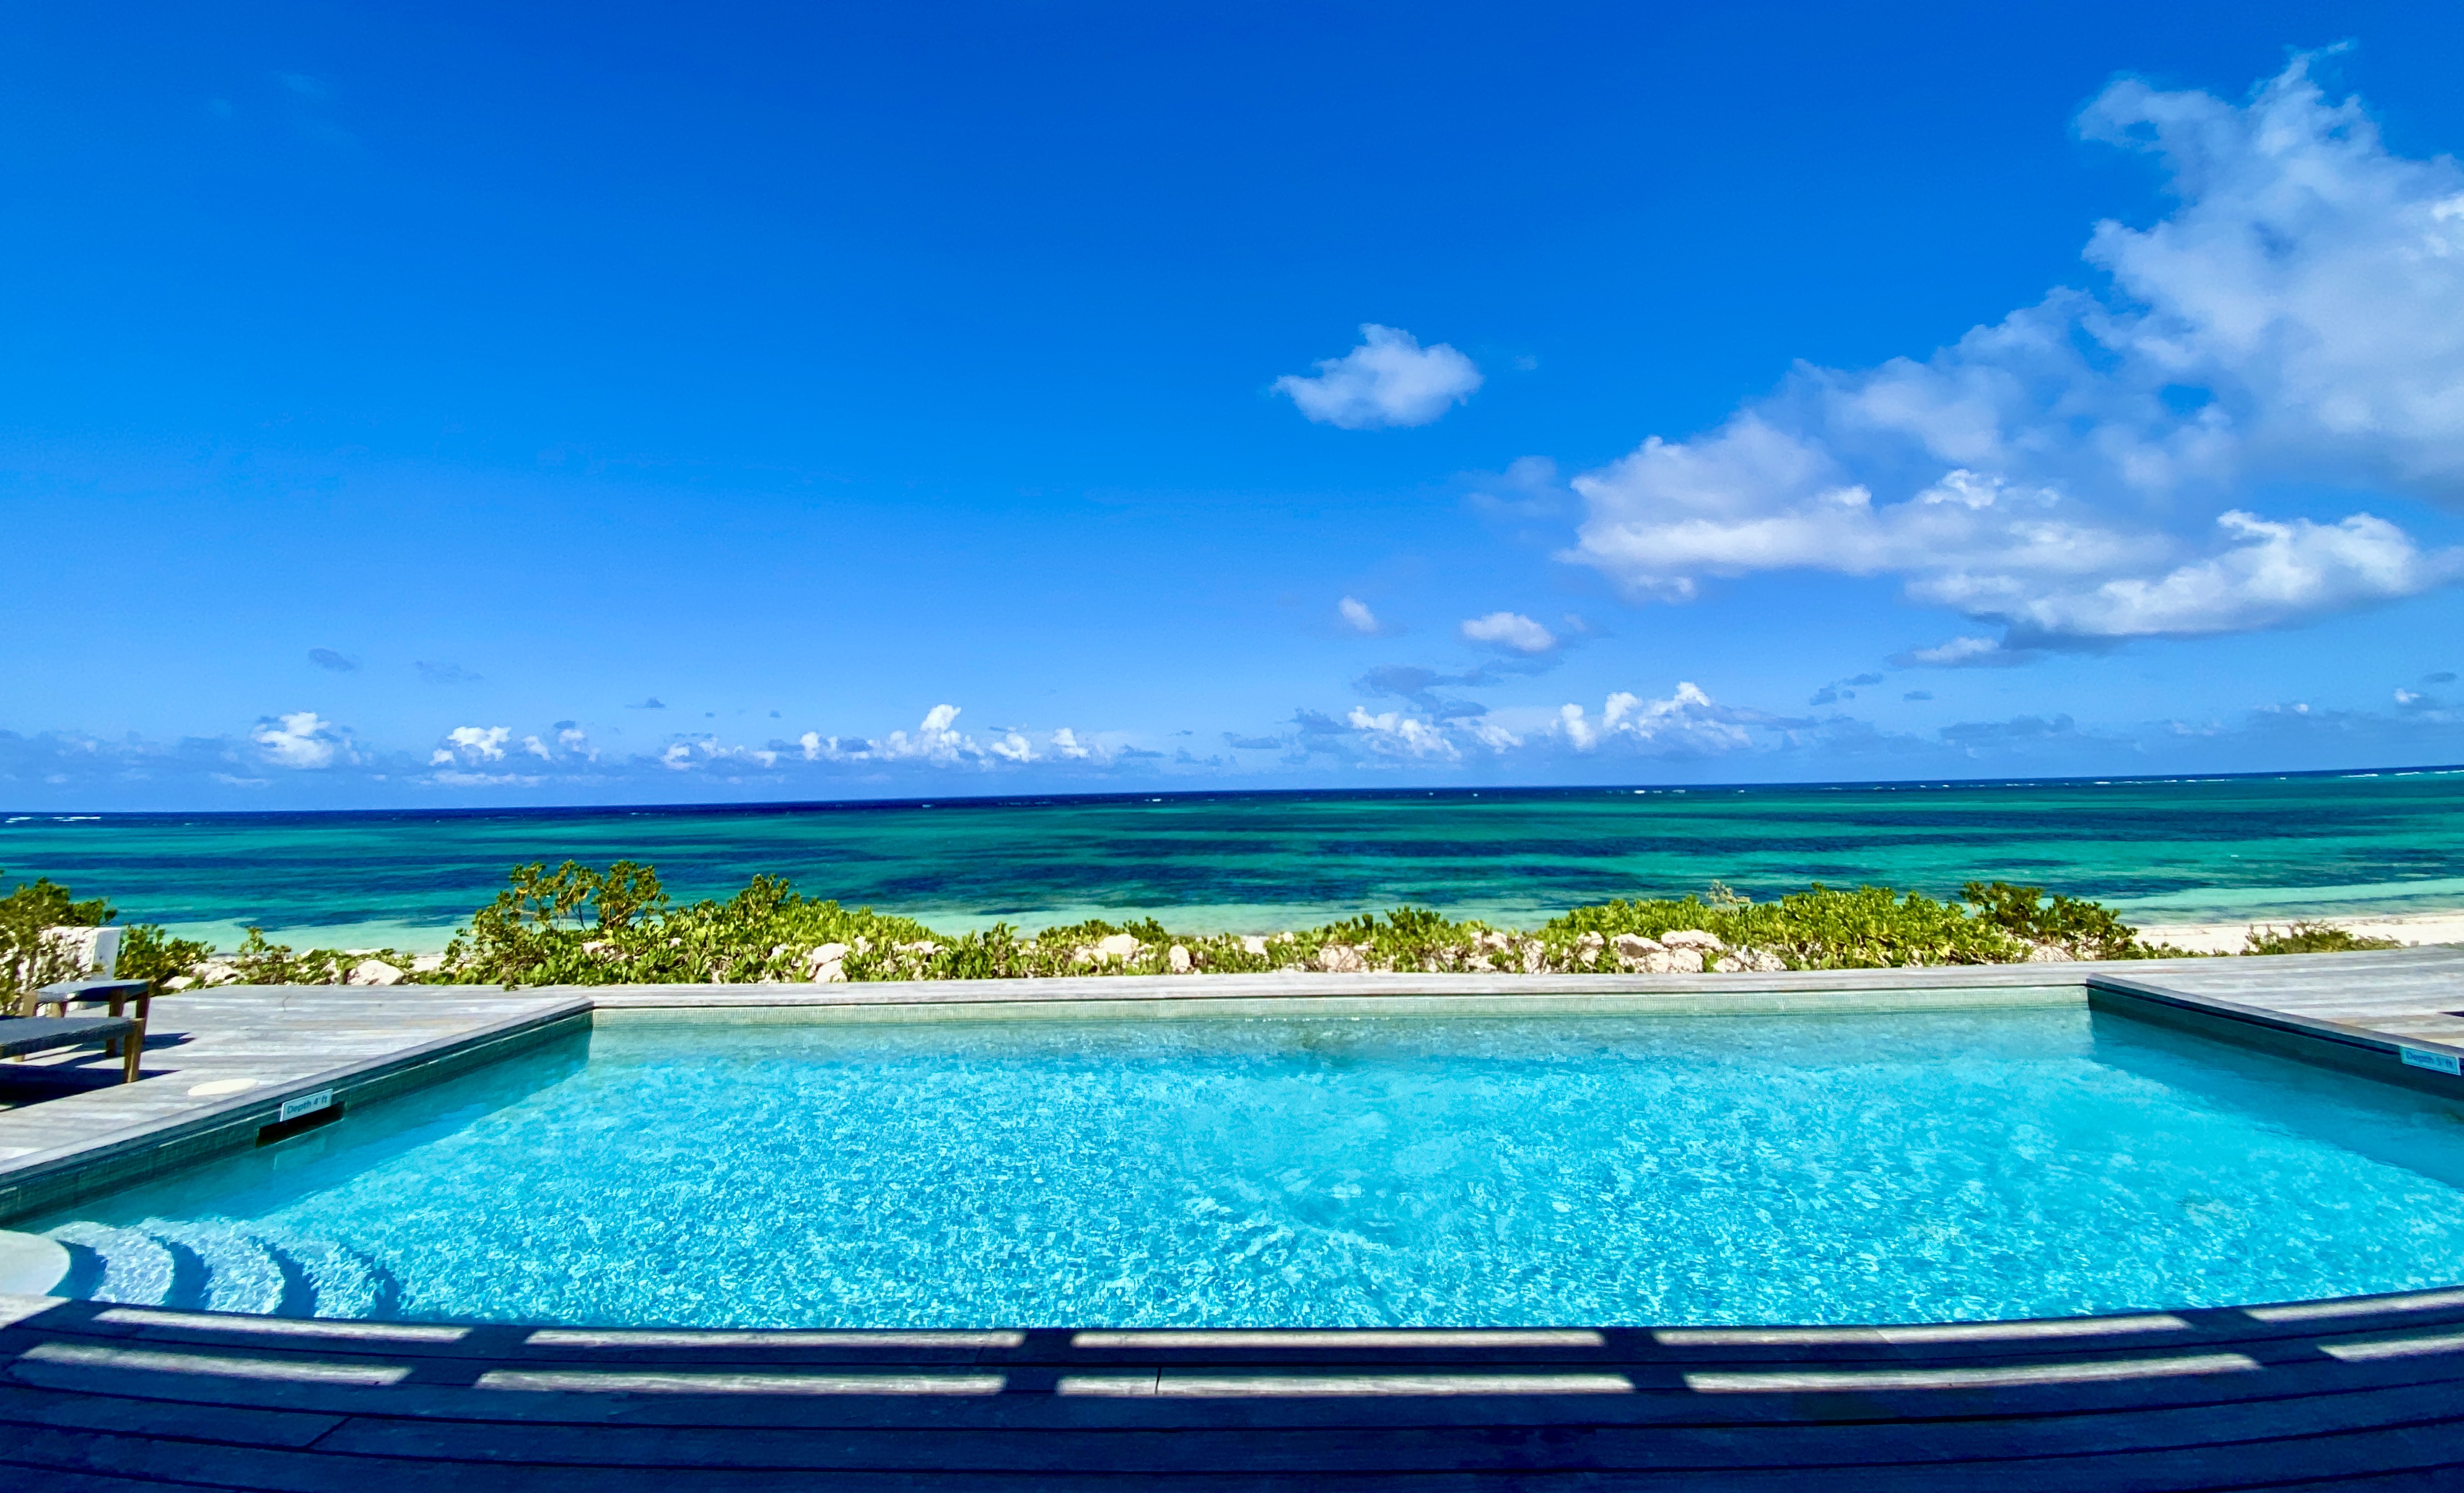 The pool of a villa overlooks the Atlantic Ocean at the Sailrock Resort in South Caicos.